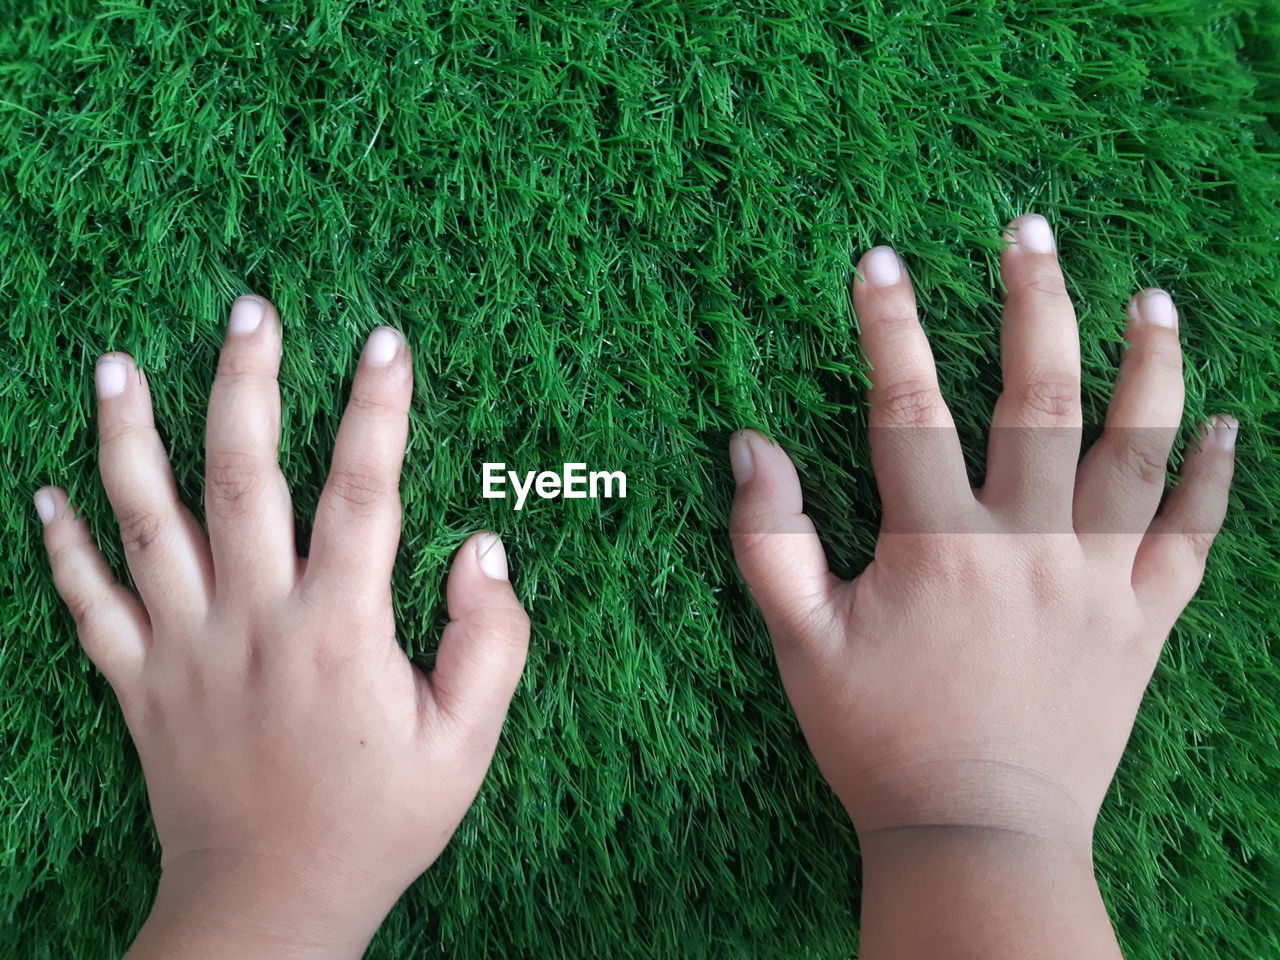 Cropped image of person hand on grass field